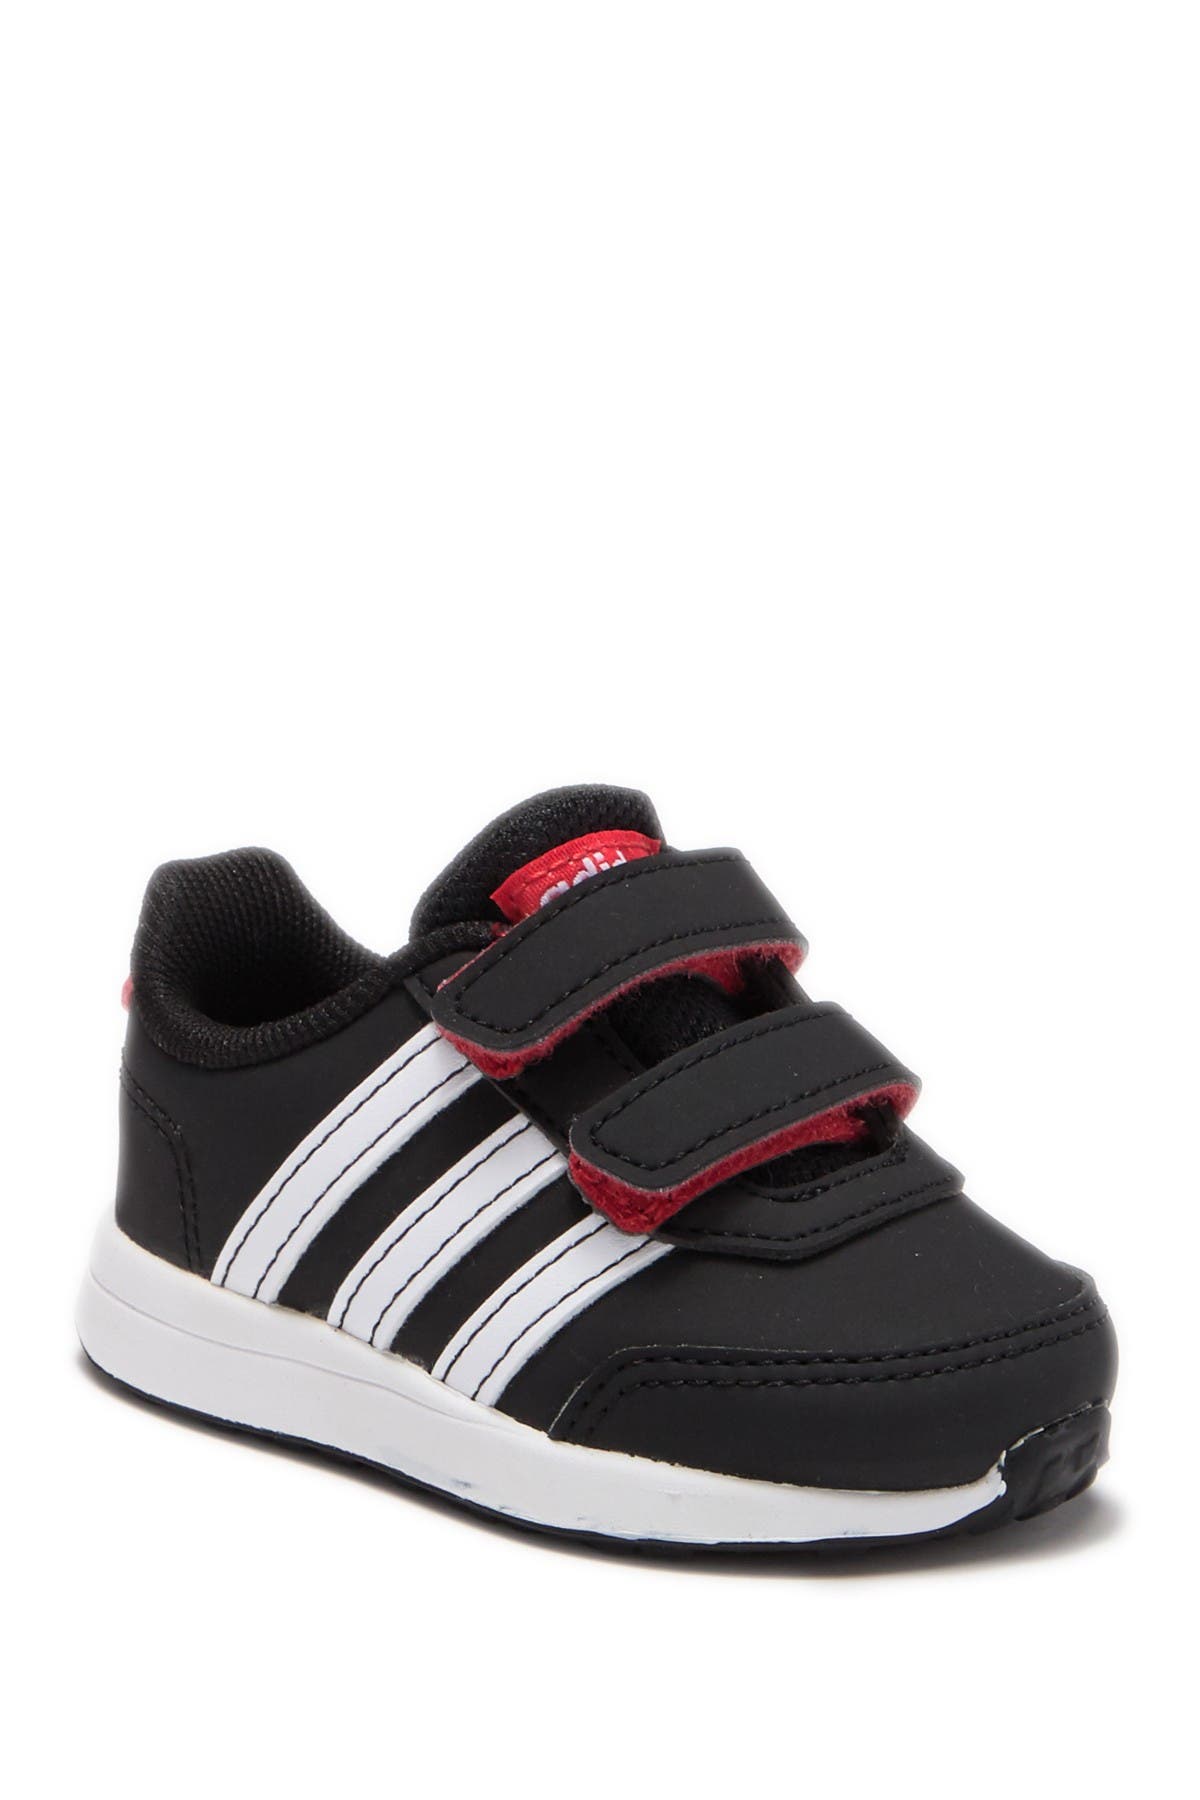 adidas | Switch 2.0 Sneaker | Nordstrom 